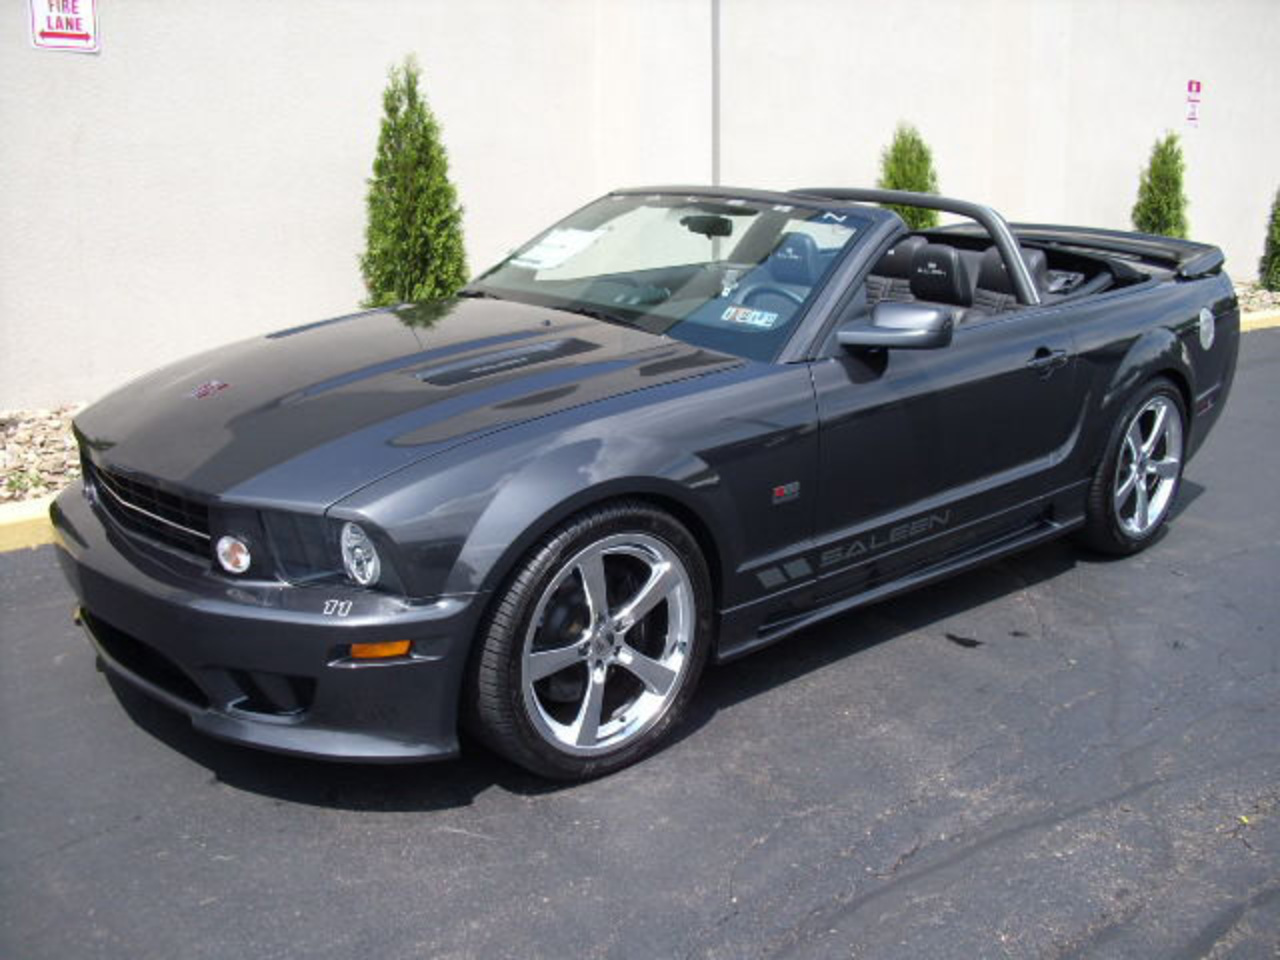 Saleen Mustang S281 Superchaged Photo Gallery: Photo #01 out of 7 ...